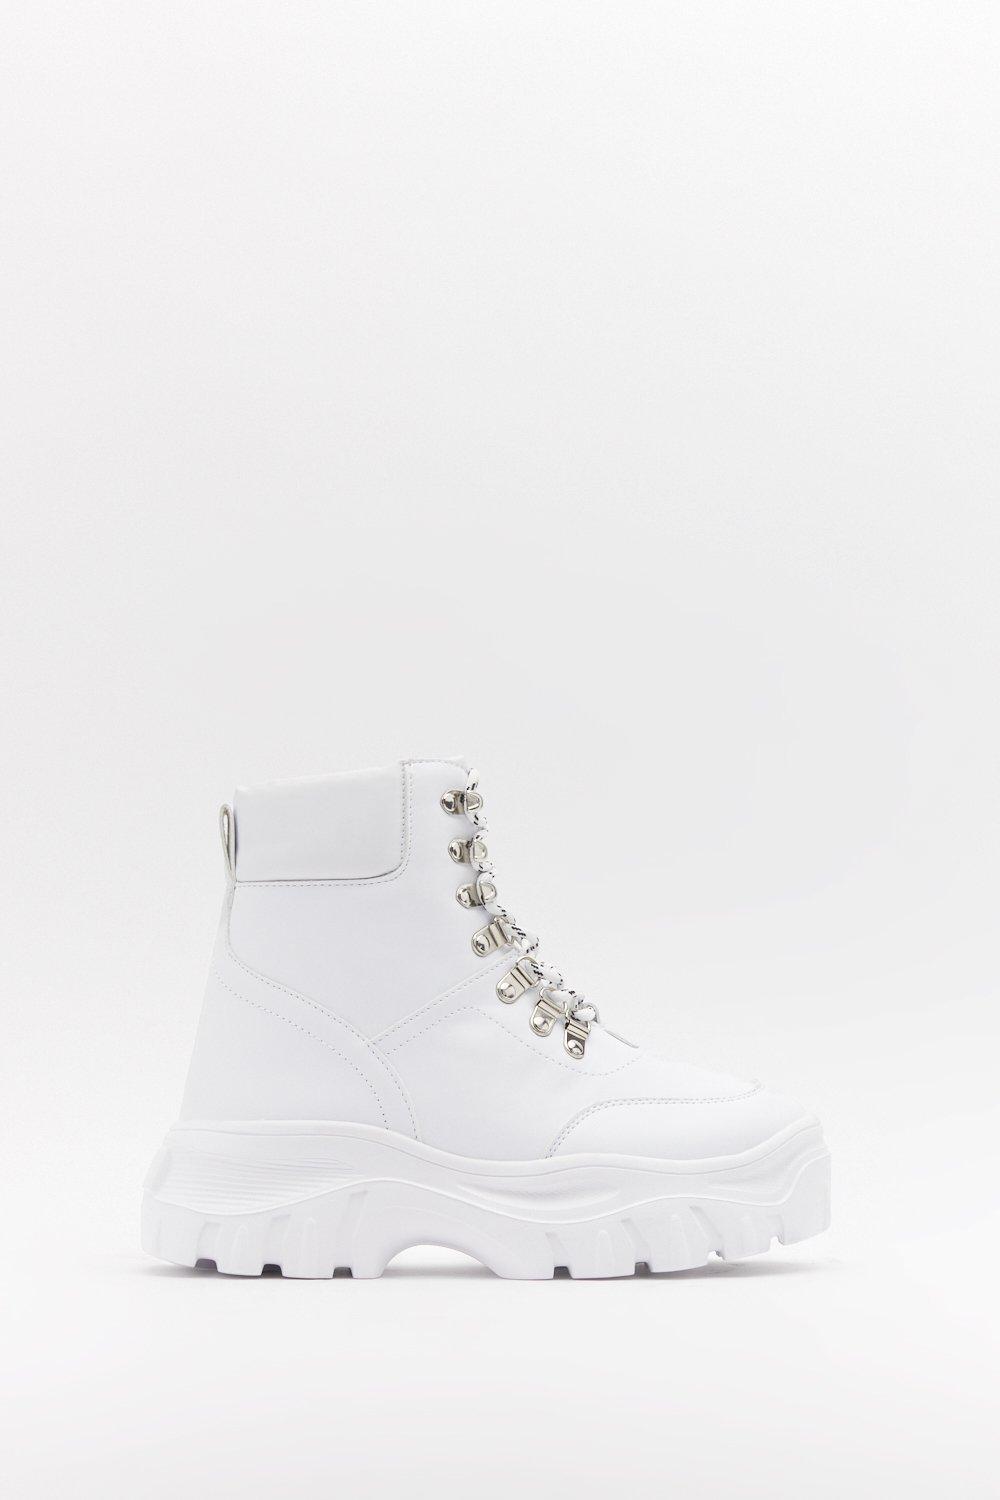 chunky sneaker boots